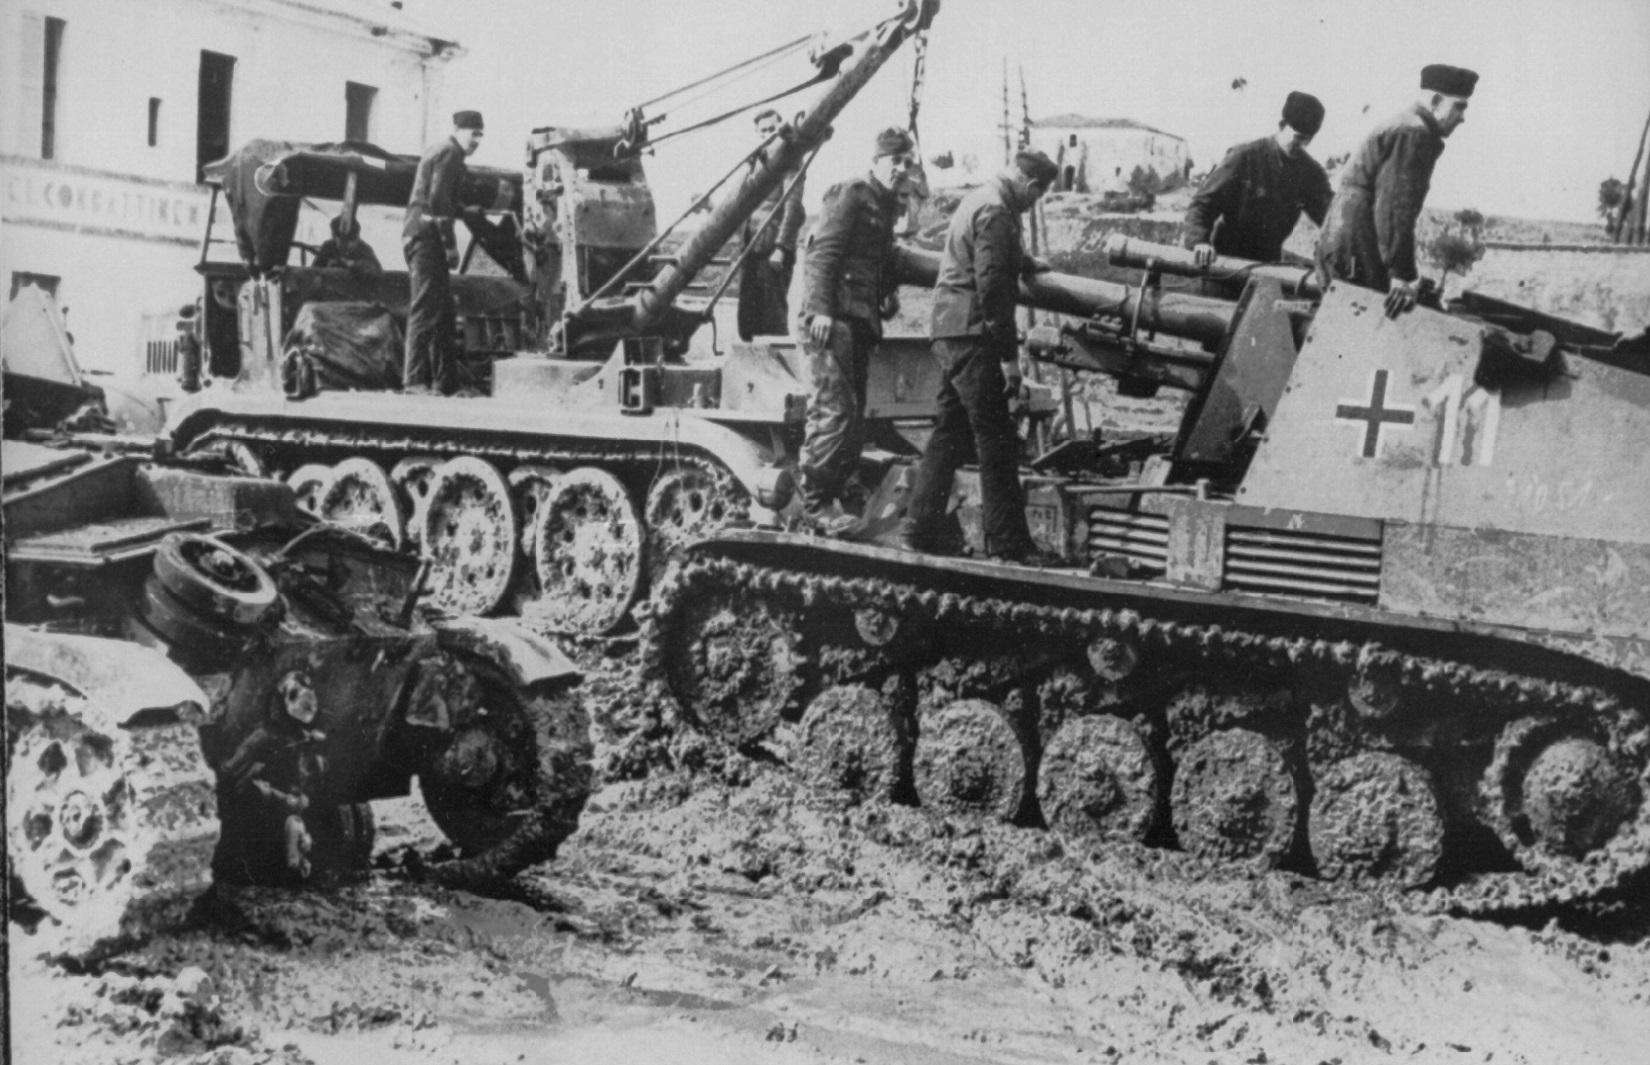 Sd.Kfz. 124 Wespe Self-Propelled Gun underwent maintenance in challenging muddy conditions in 1944, Italy.